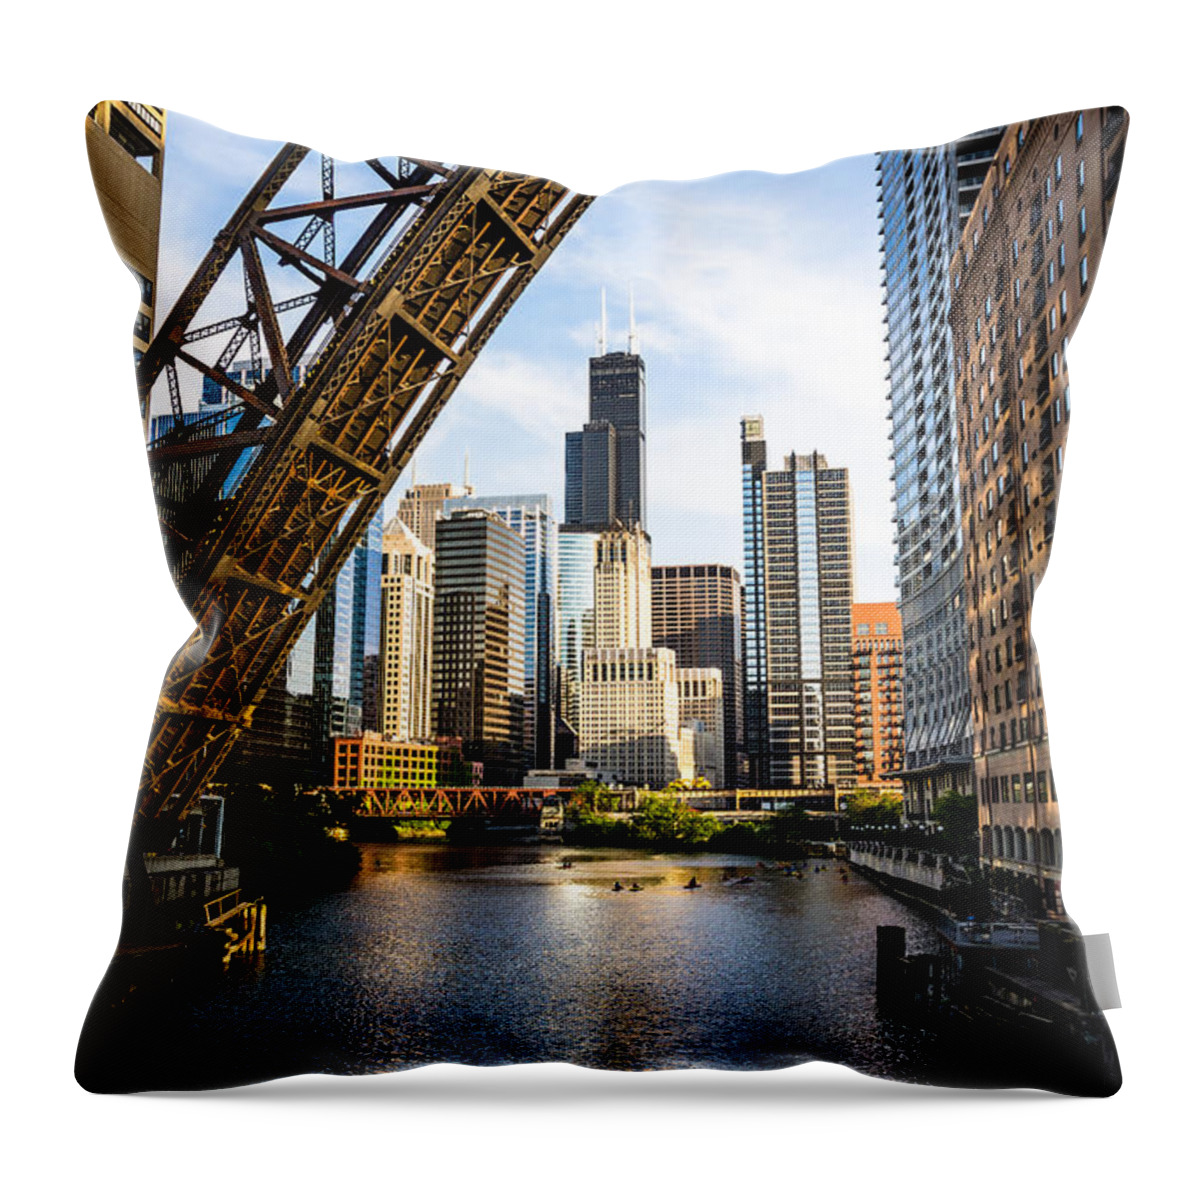 America Throw Pillow featuring the photograph Chicago Downtown and Kinzie Street Railroad Bridge by Paul Velgos